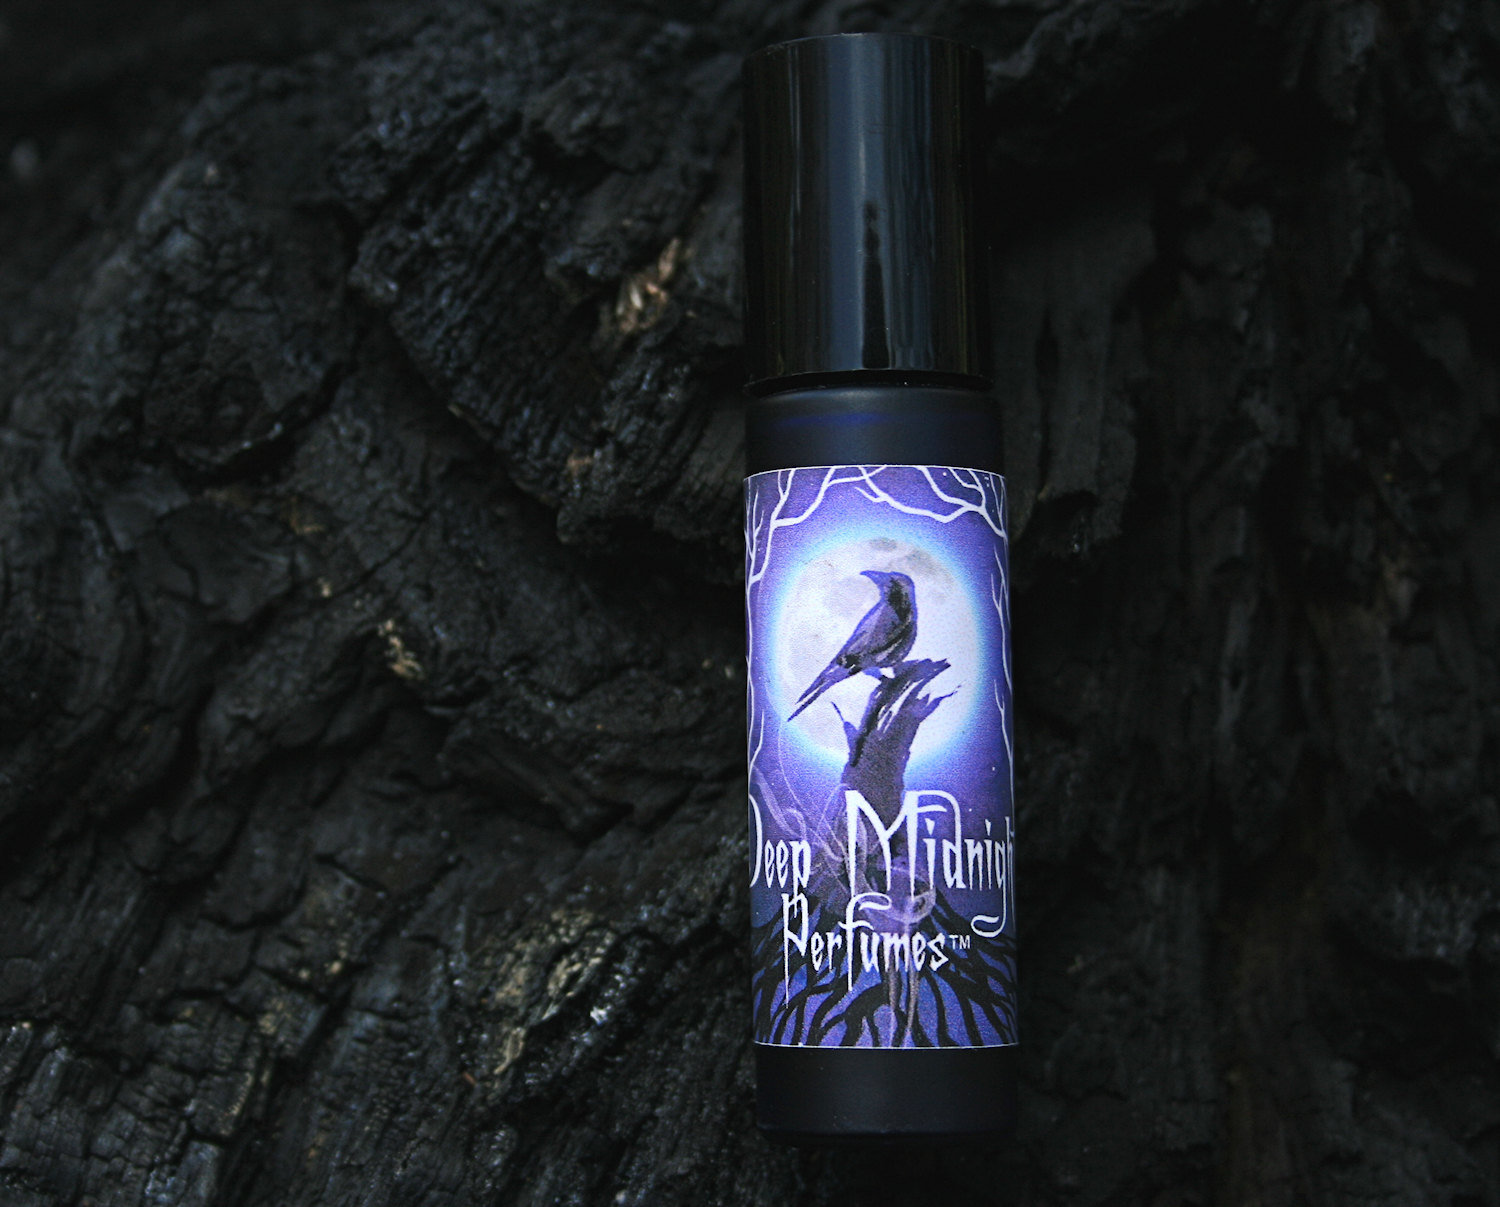 BURNT OFFERING™ Perfume Oil - Charred Cedar and Pine, Dark Honey, Beeswax - Gothic Autumn - Fall Fragrance